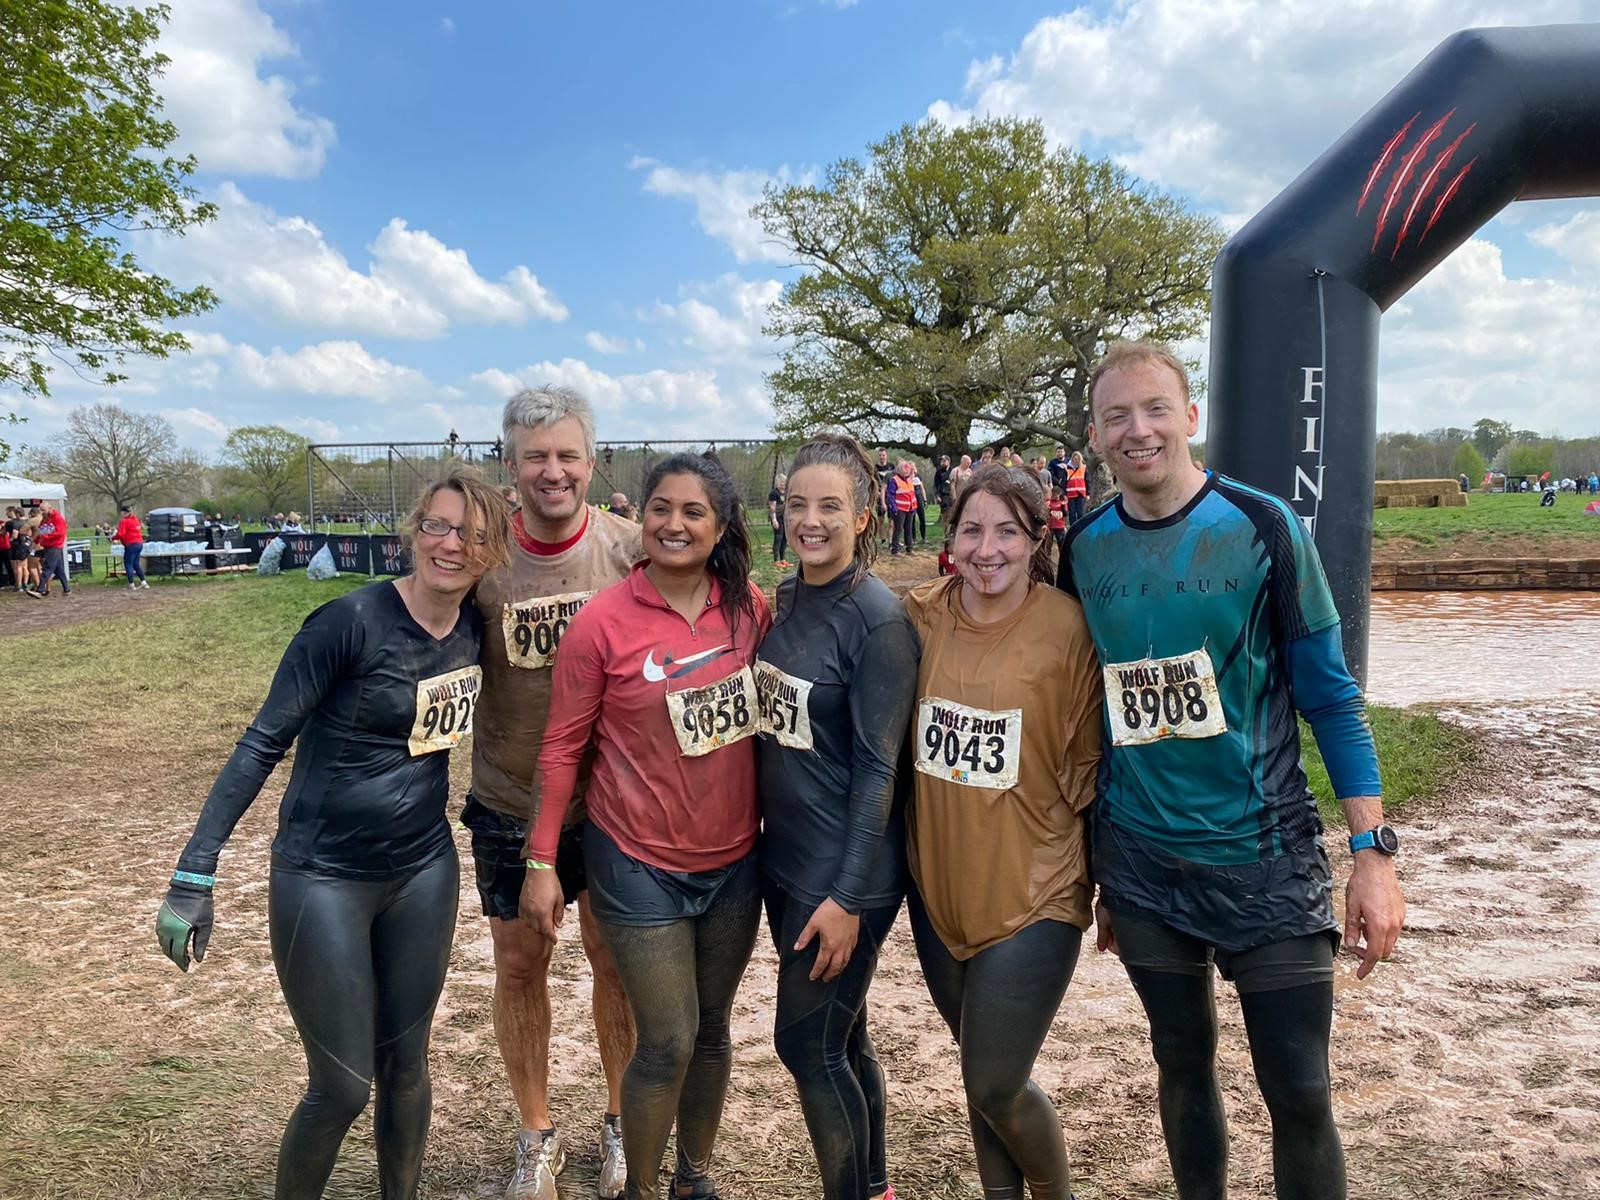 Accountants raise more than £1,000 with The Wolf Run challenge